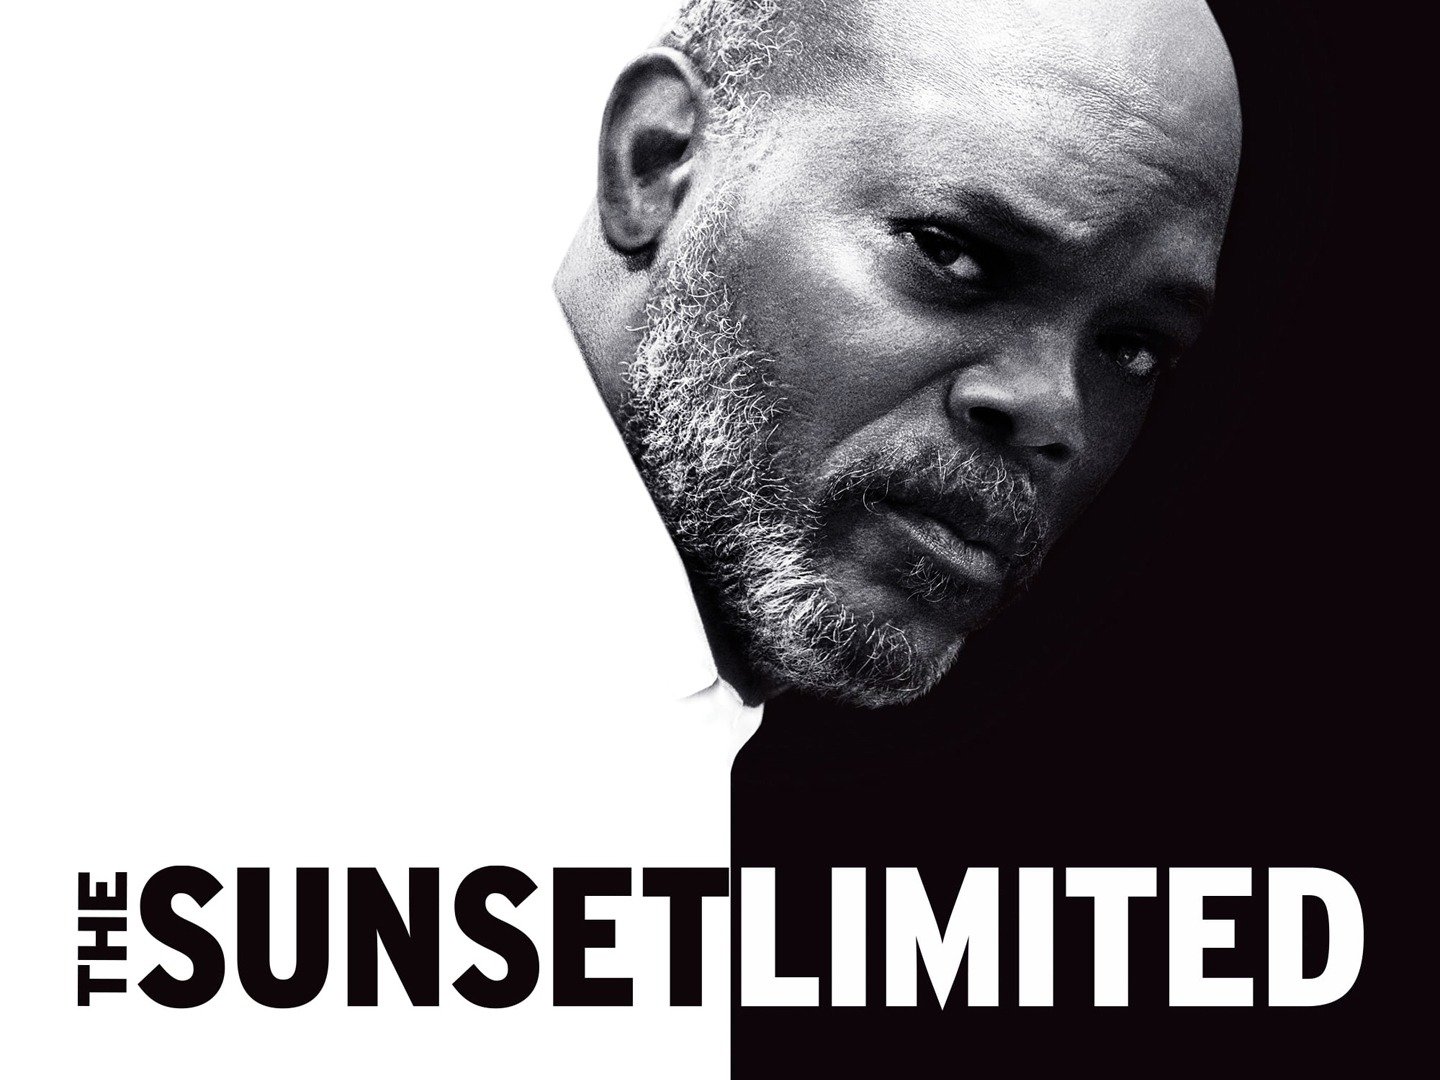 46-facts-about-the-movie-the-sunset-limited